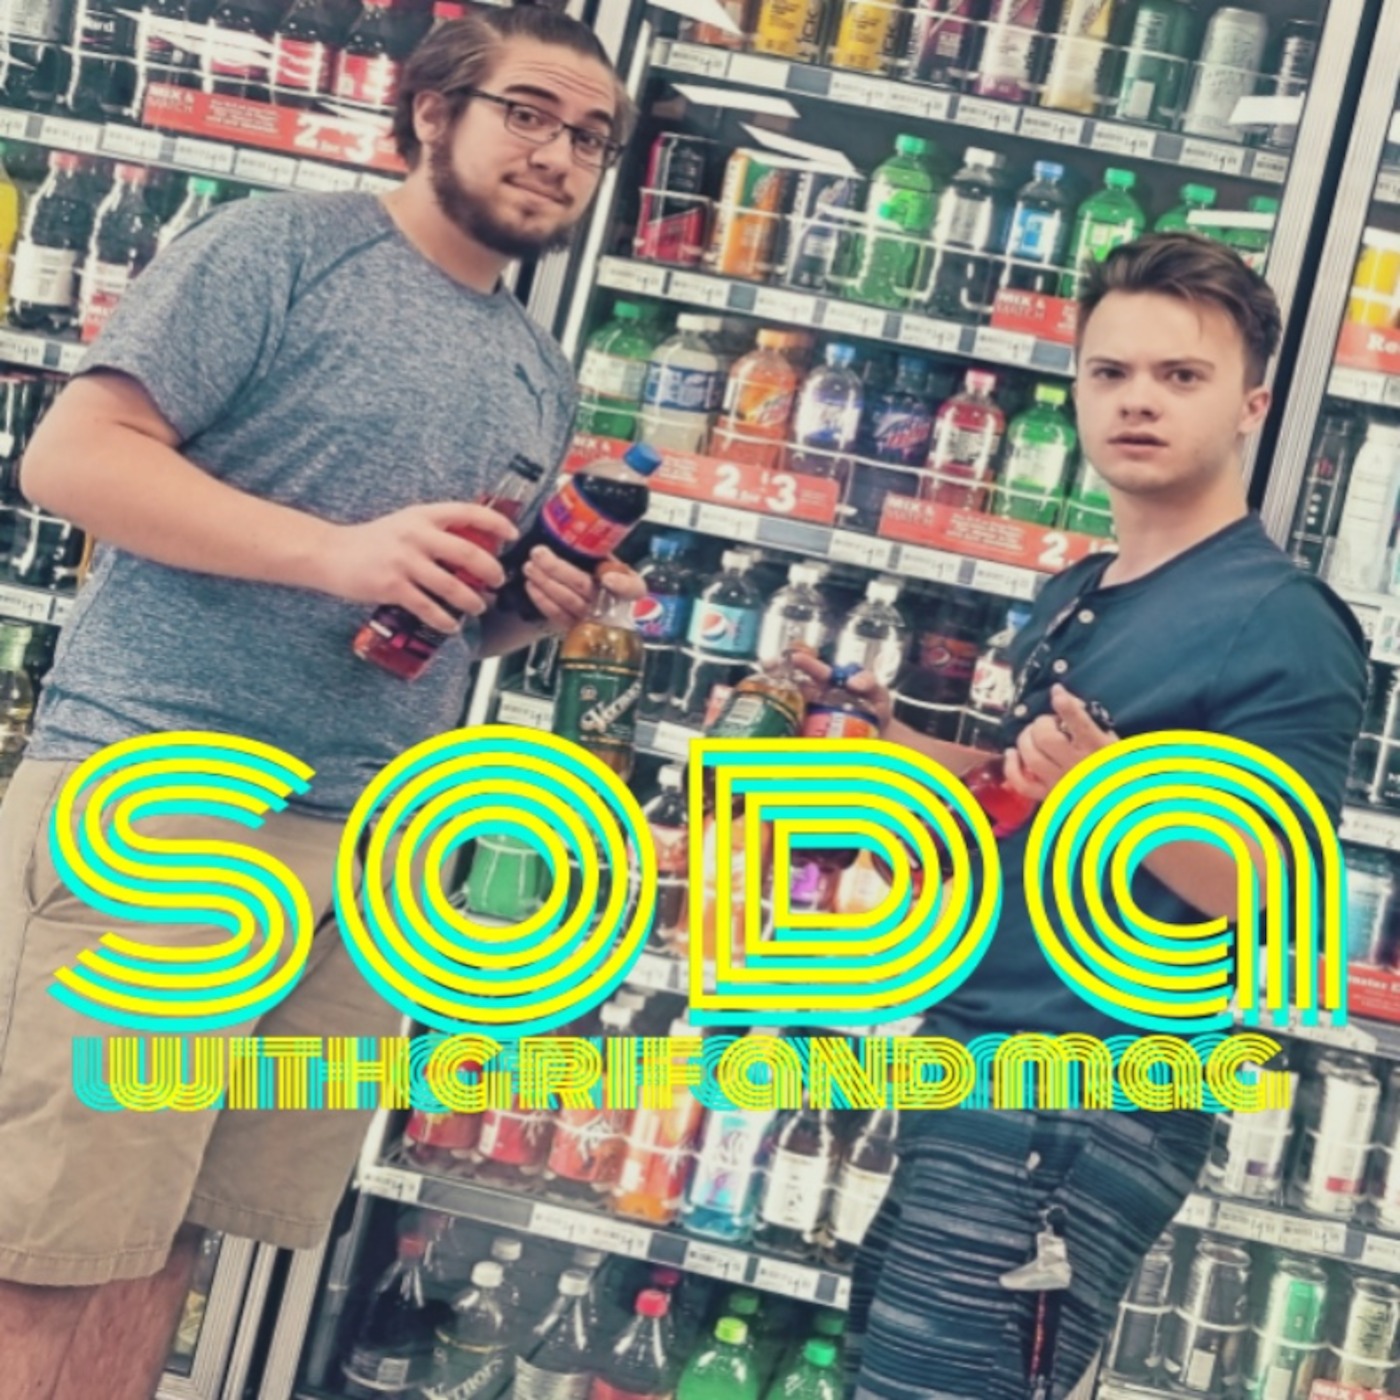 Soda with Grif and Mag